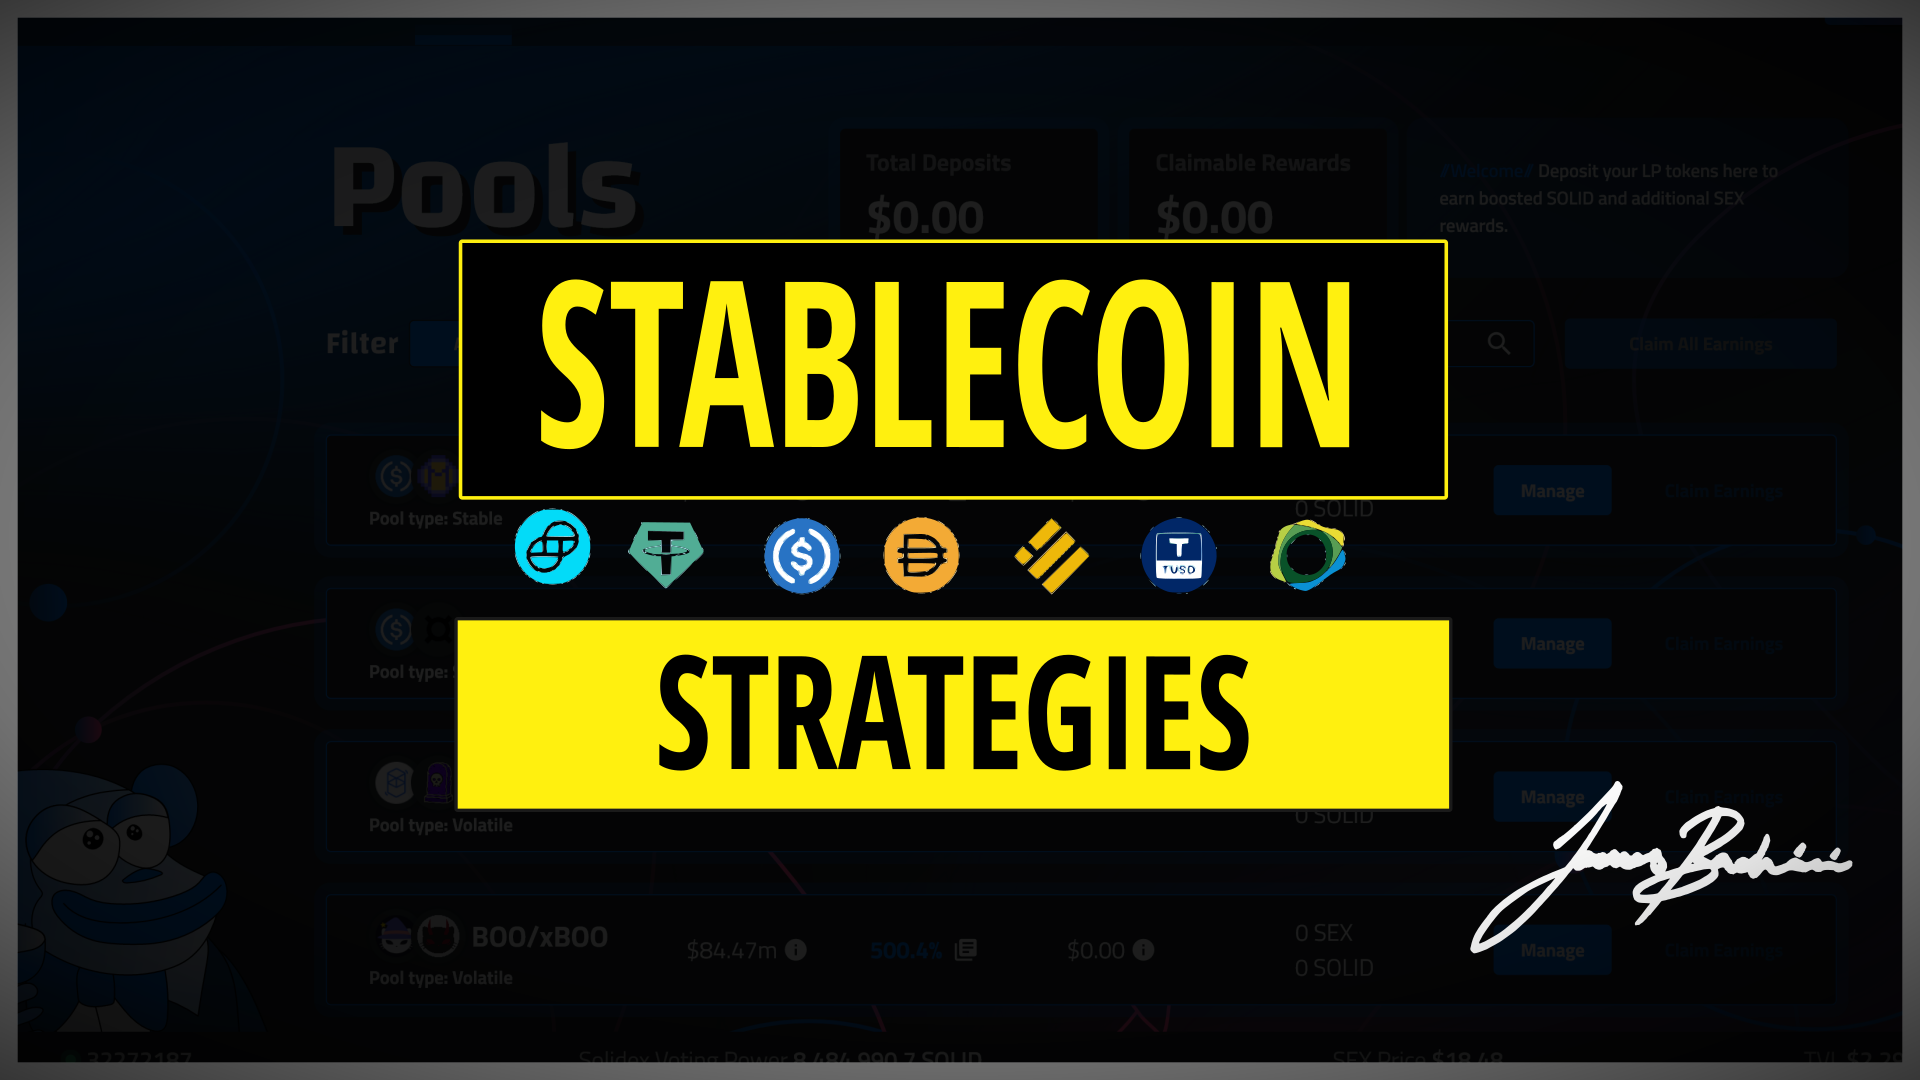 STABLECOIN STRATEGIES